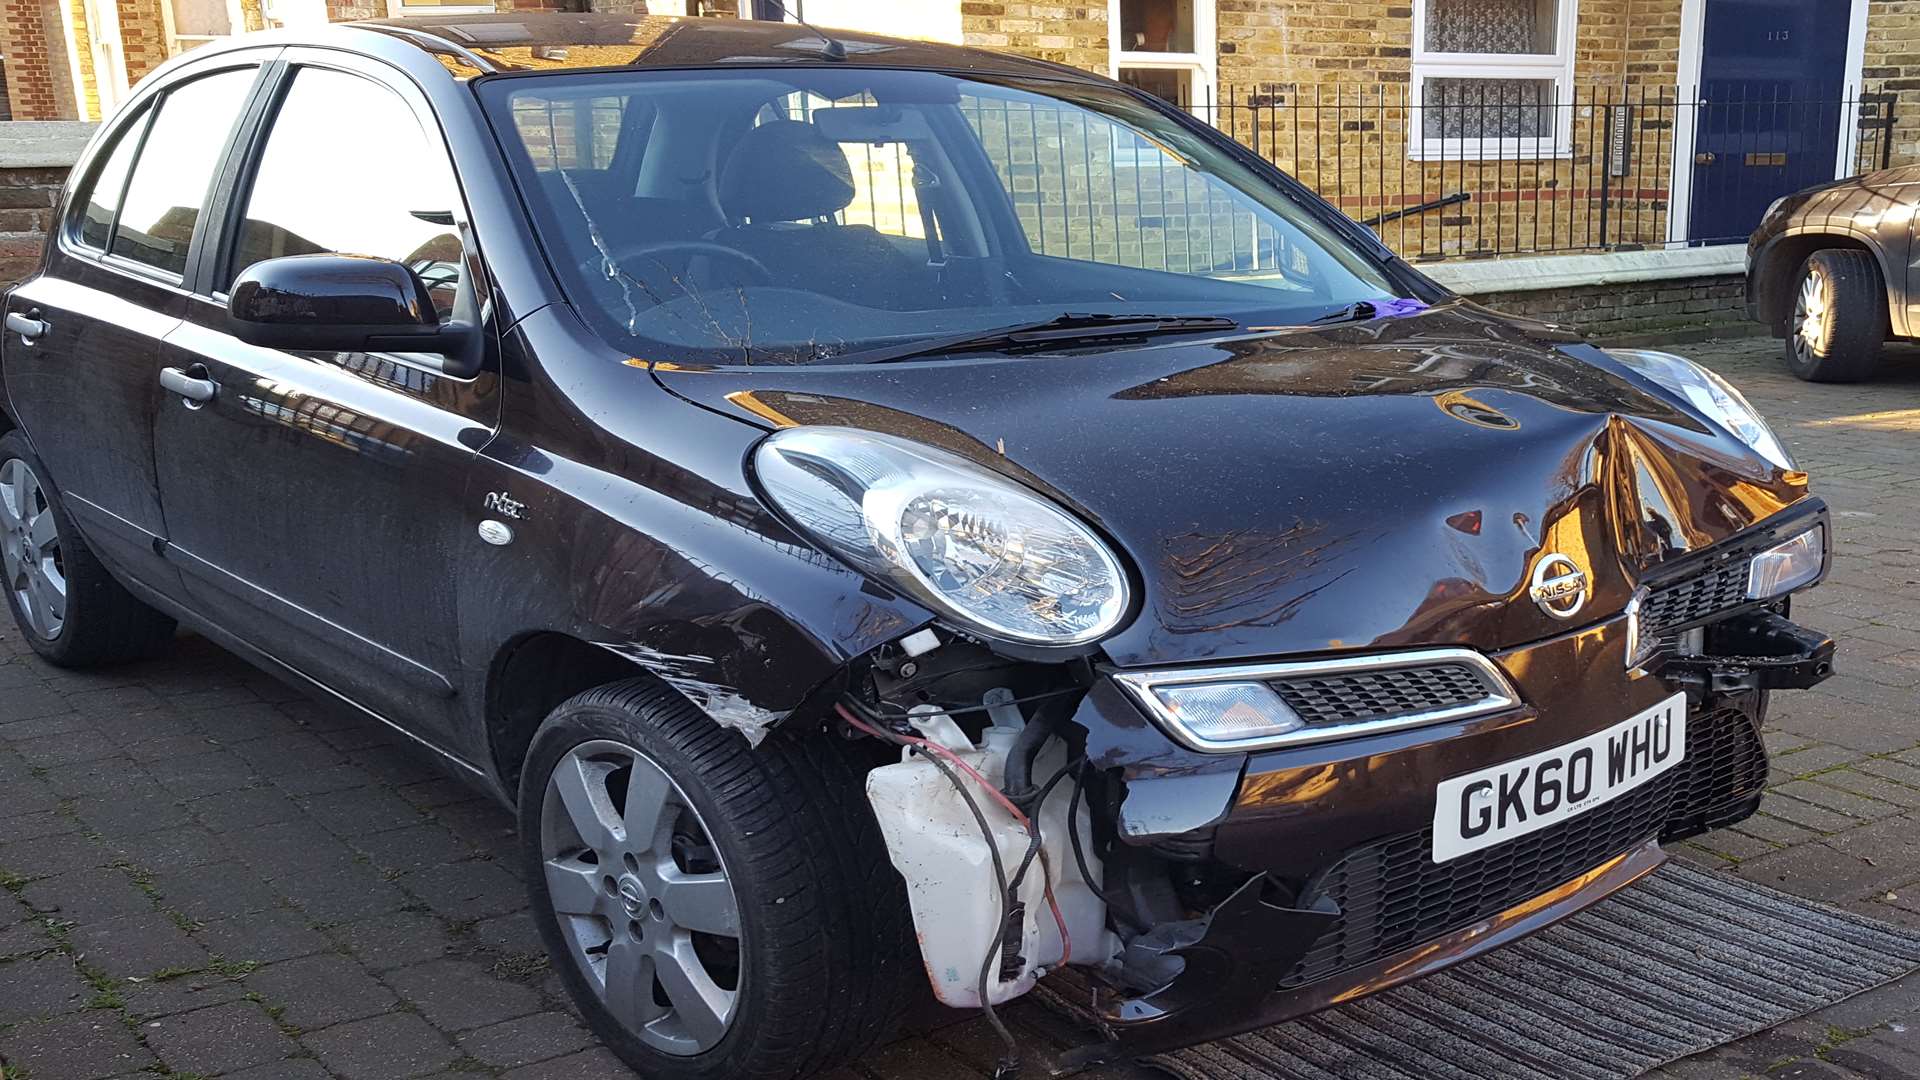 Damage to the Nissan Micra which crashed into the building